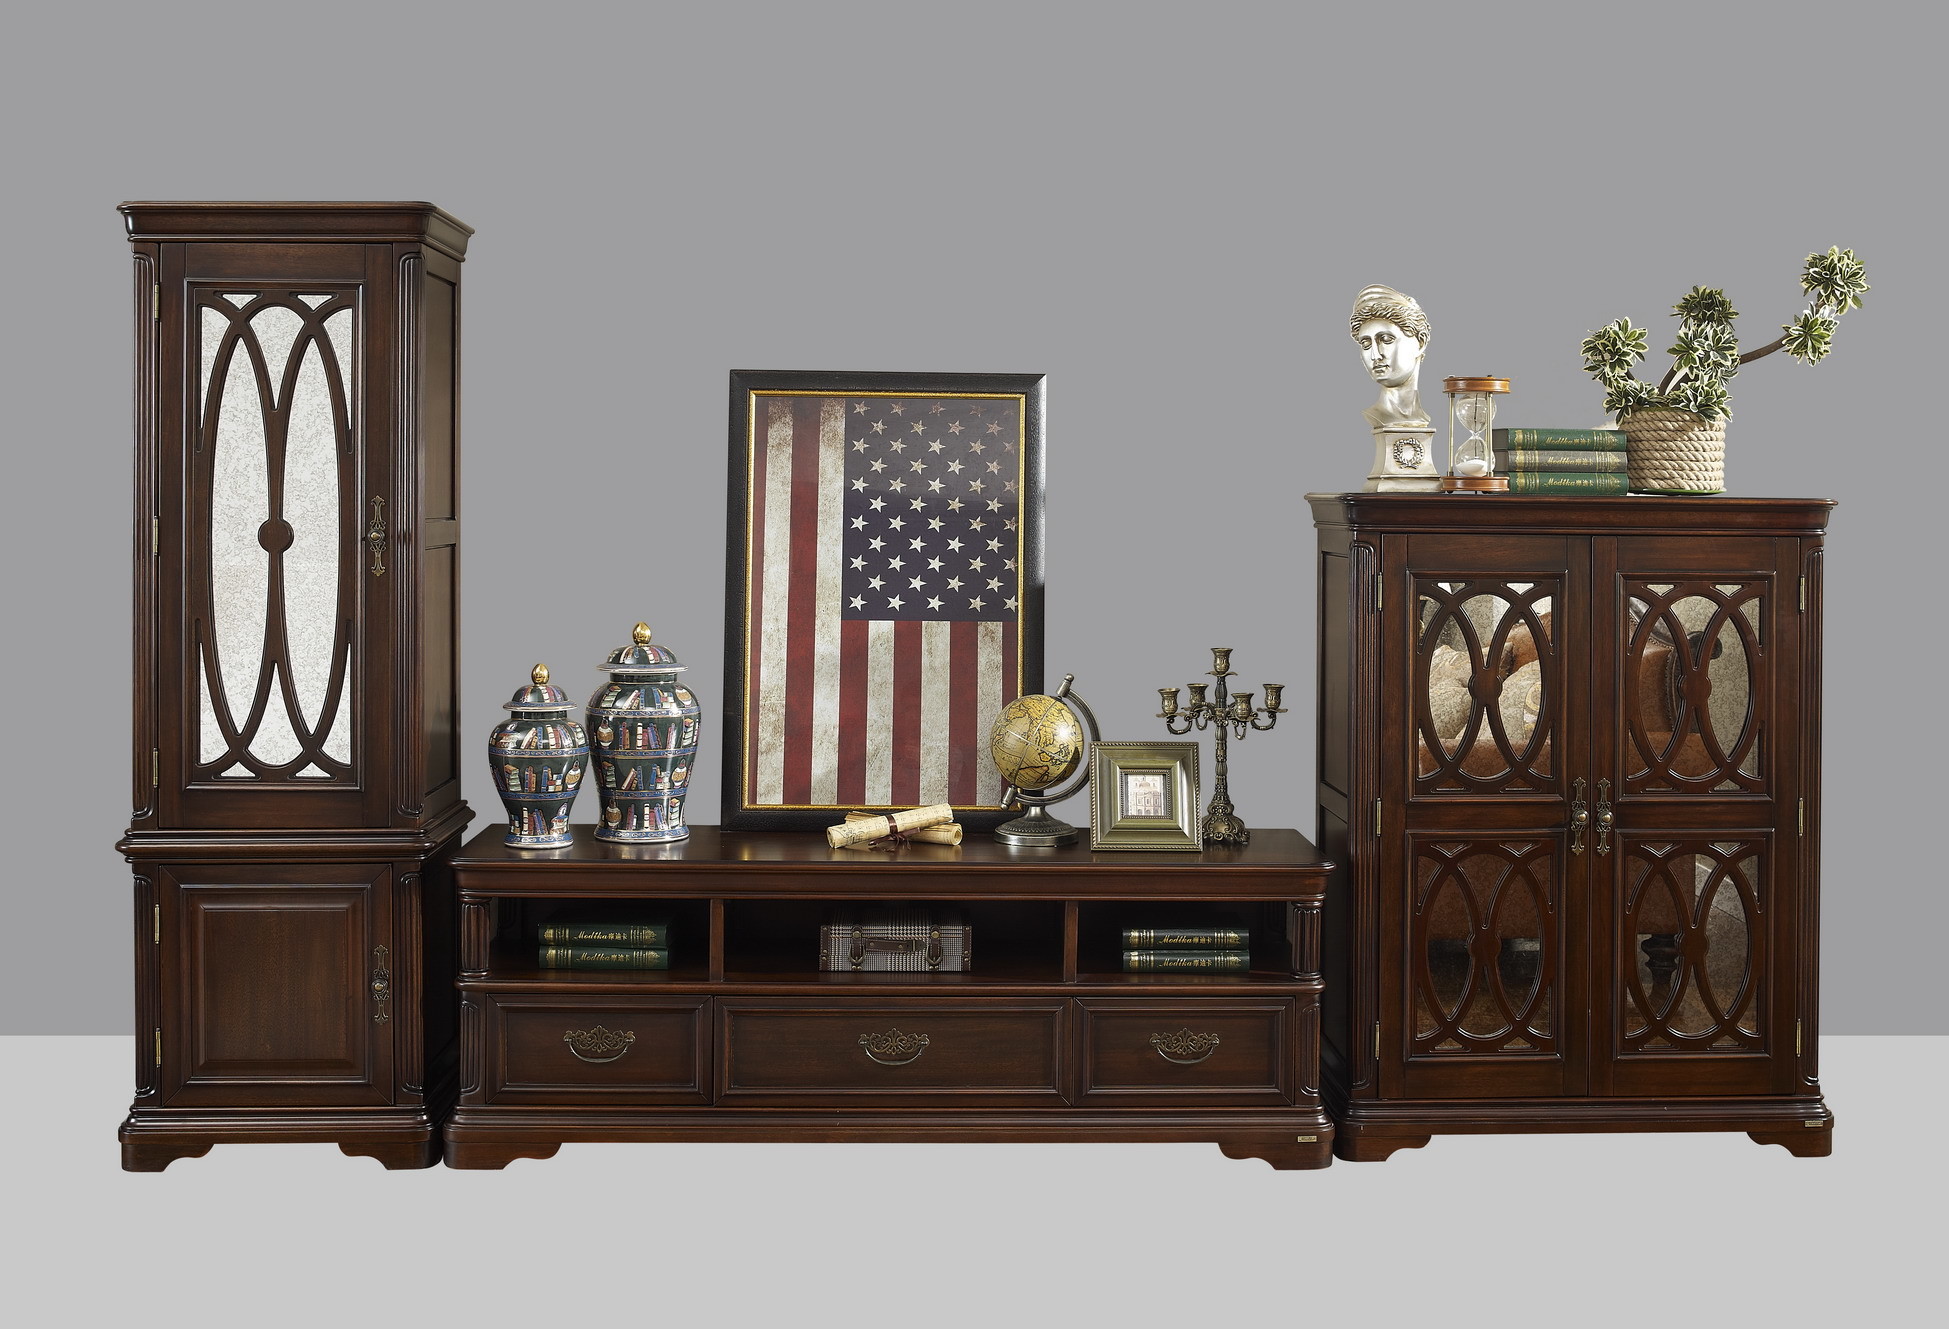 Cheap American Antique Living leisure room furniture sets Wooden TV wall unit set by Floor stand and Tall display cabinet for sale